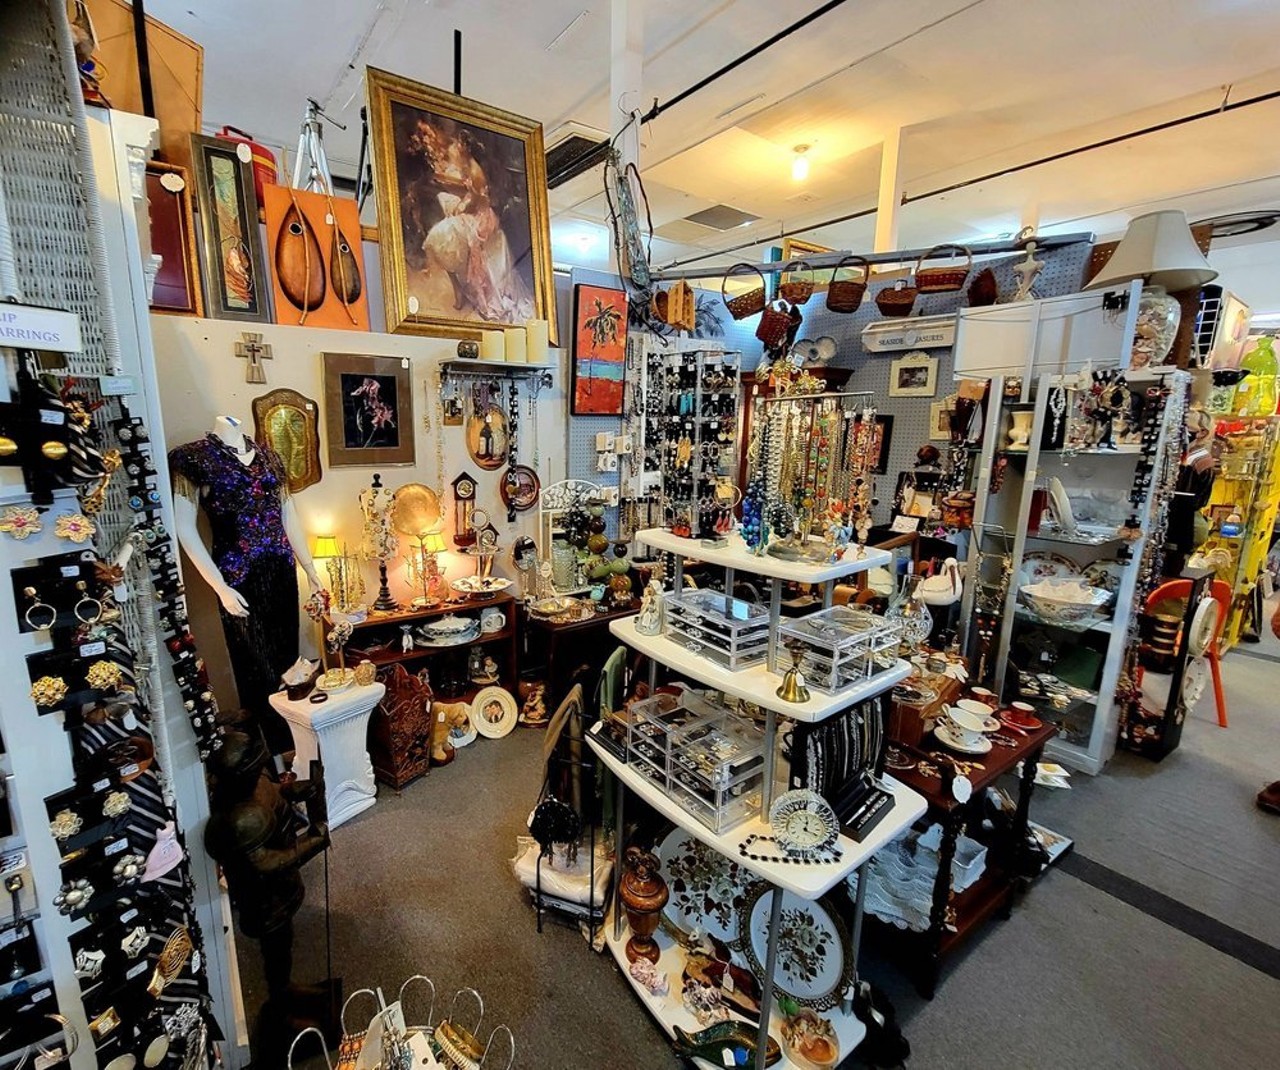 Orange Tree Antiques Mall
853 Orlando Ave., Winter Park
With more than just antique furniture and decor (although there is a lot of that), Orange Tree Antiques Mall is also home to some seriously cool retro collectibles, vintage clothing and records and more.